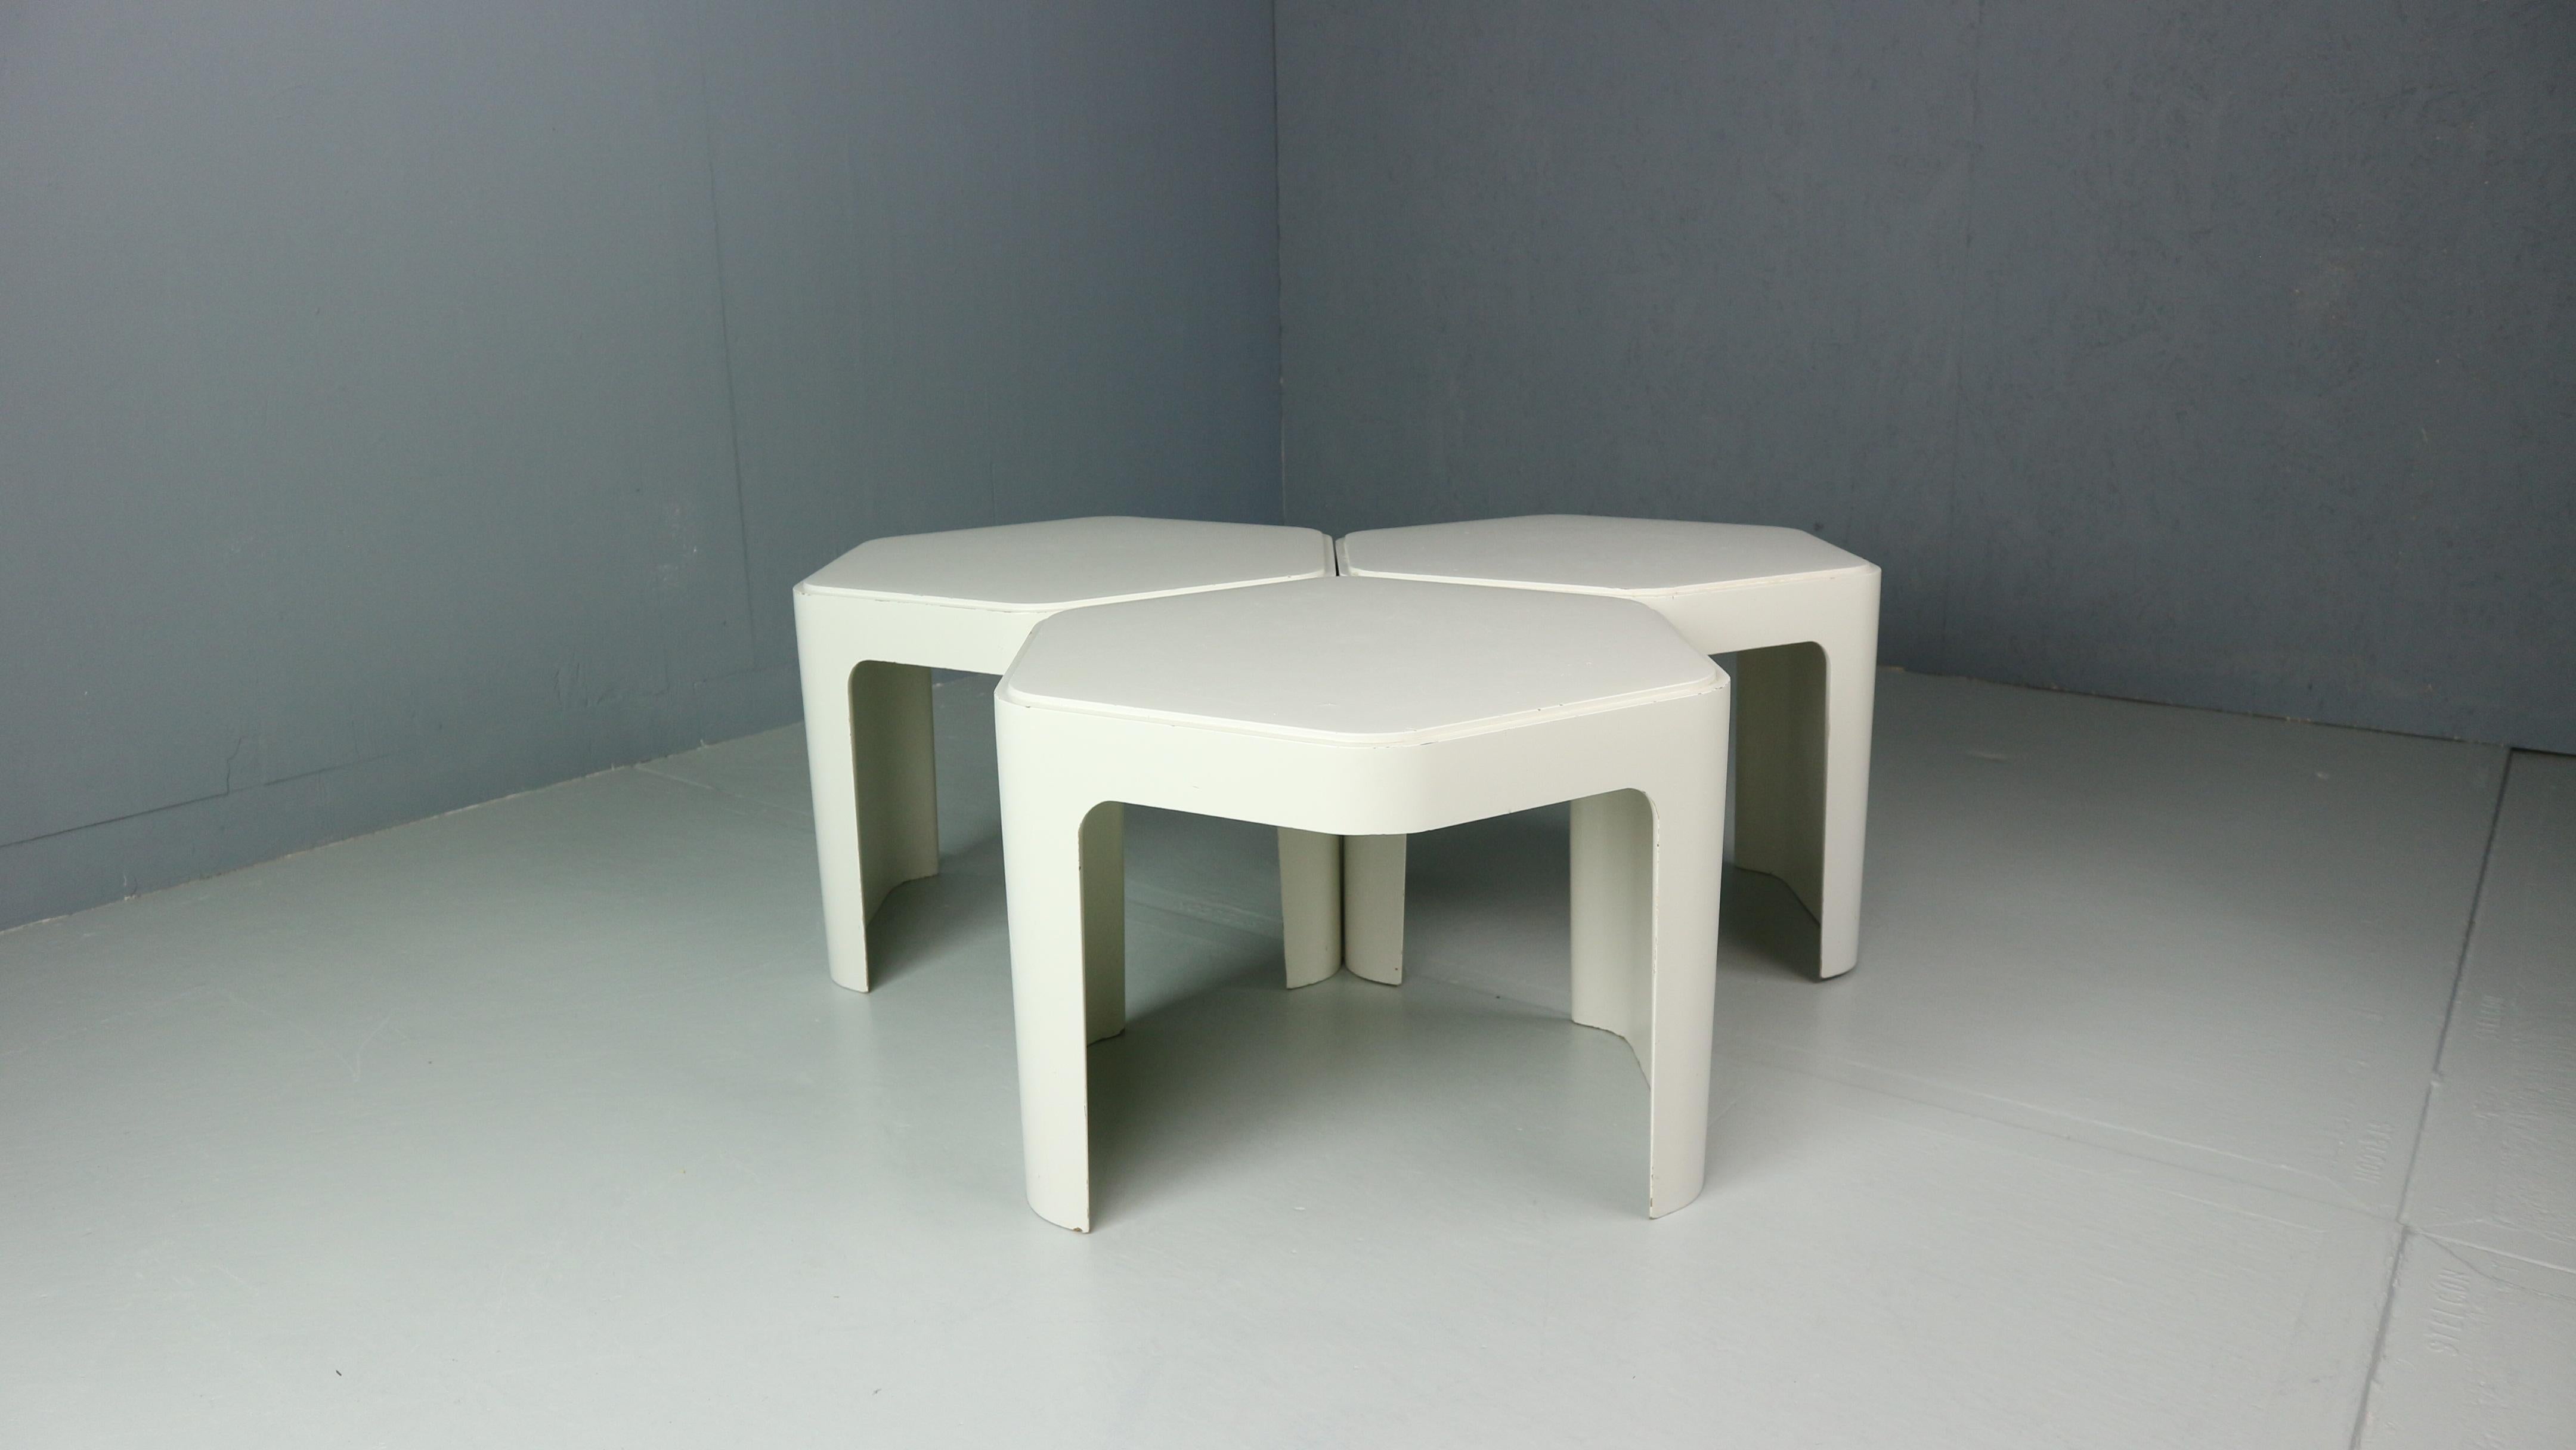 Very rare and stunning set of 3 vintage 1970s space-age side tables produced by the German brand Form + Life Collection and designed by Peter Ghyczy in 1972. The tables are made of fiberglass and can be stacked into a modular unit / storage or